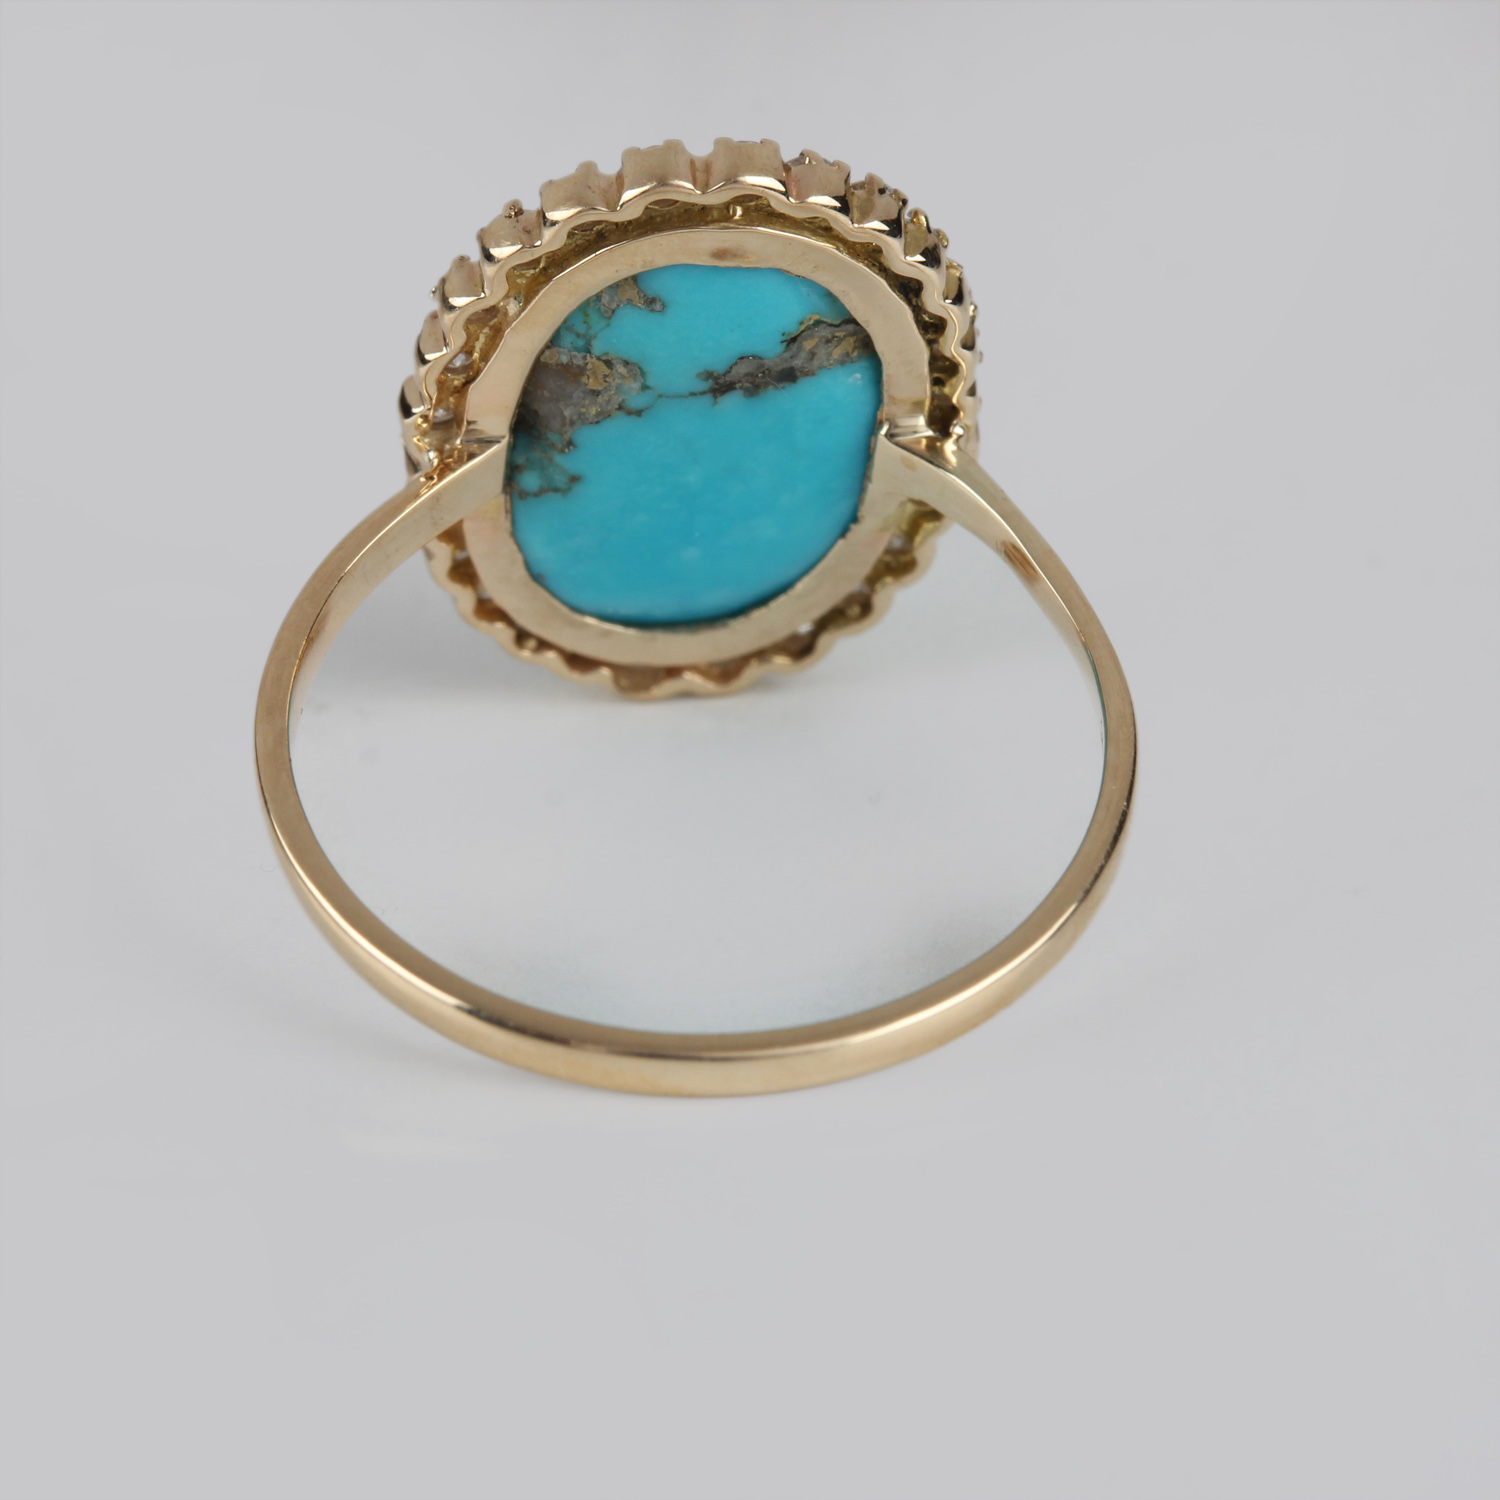 14K Solid Gold Pave Diamond Ring Turquoise Gemstone Jewelry